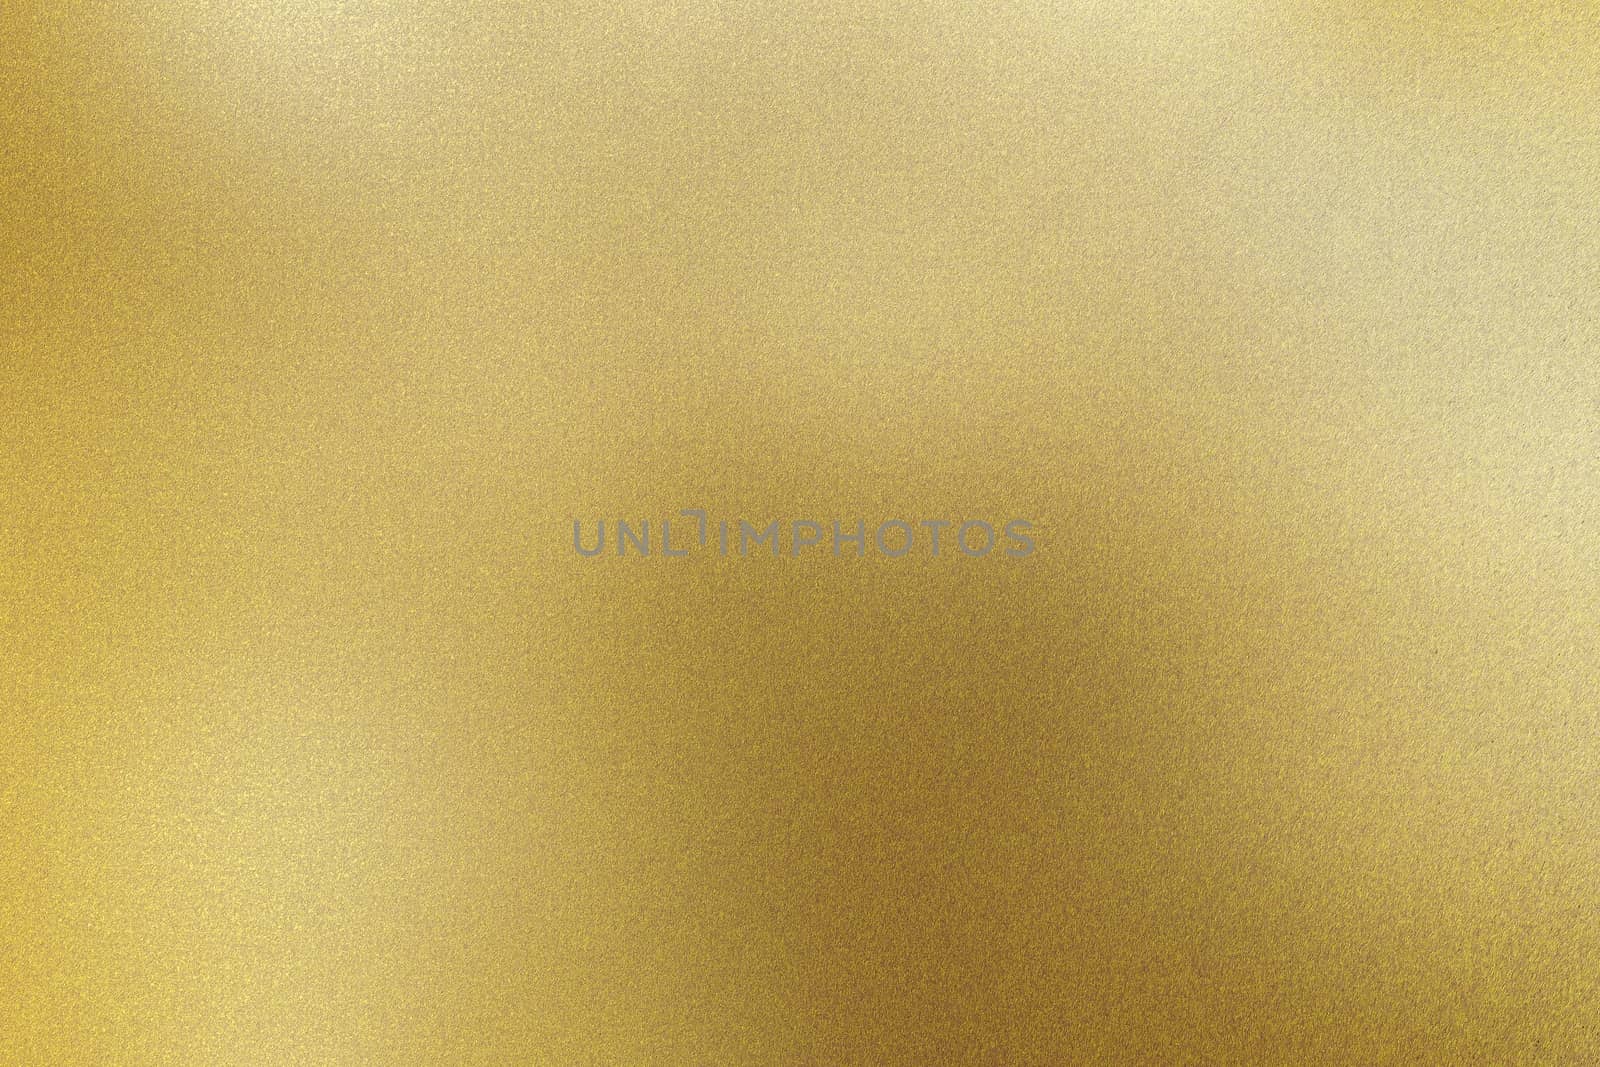 Brushed light yellow metallic sheet, abstract texture background